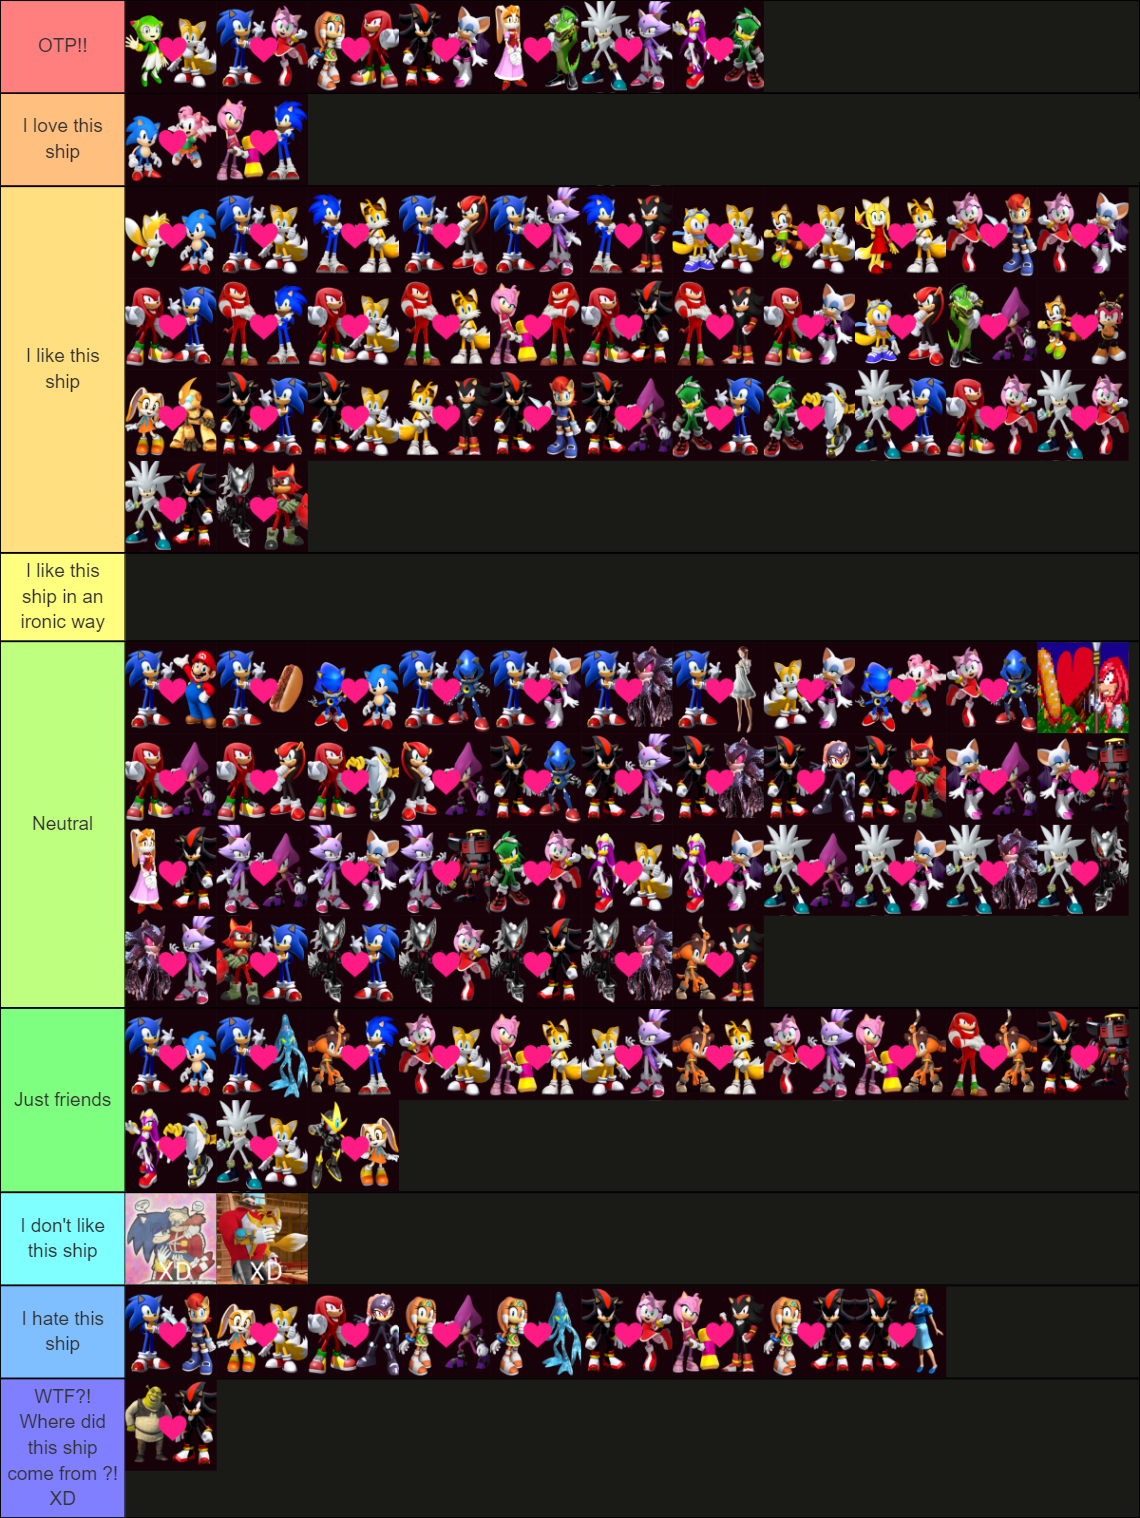 sonic games tier list by ShanahaT on DeviantArt